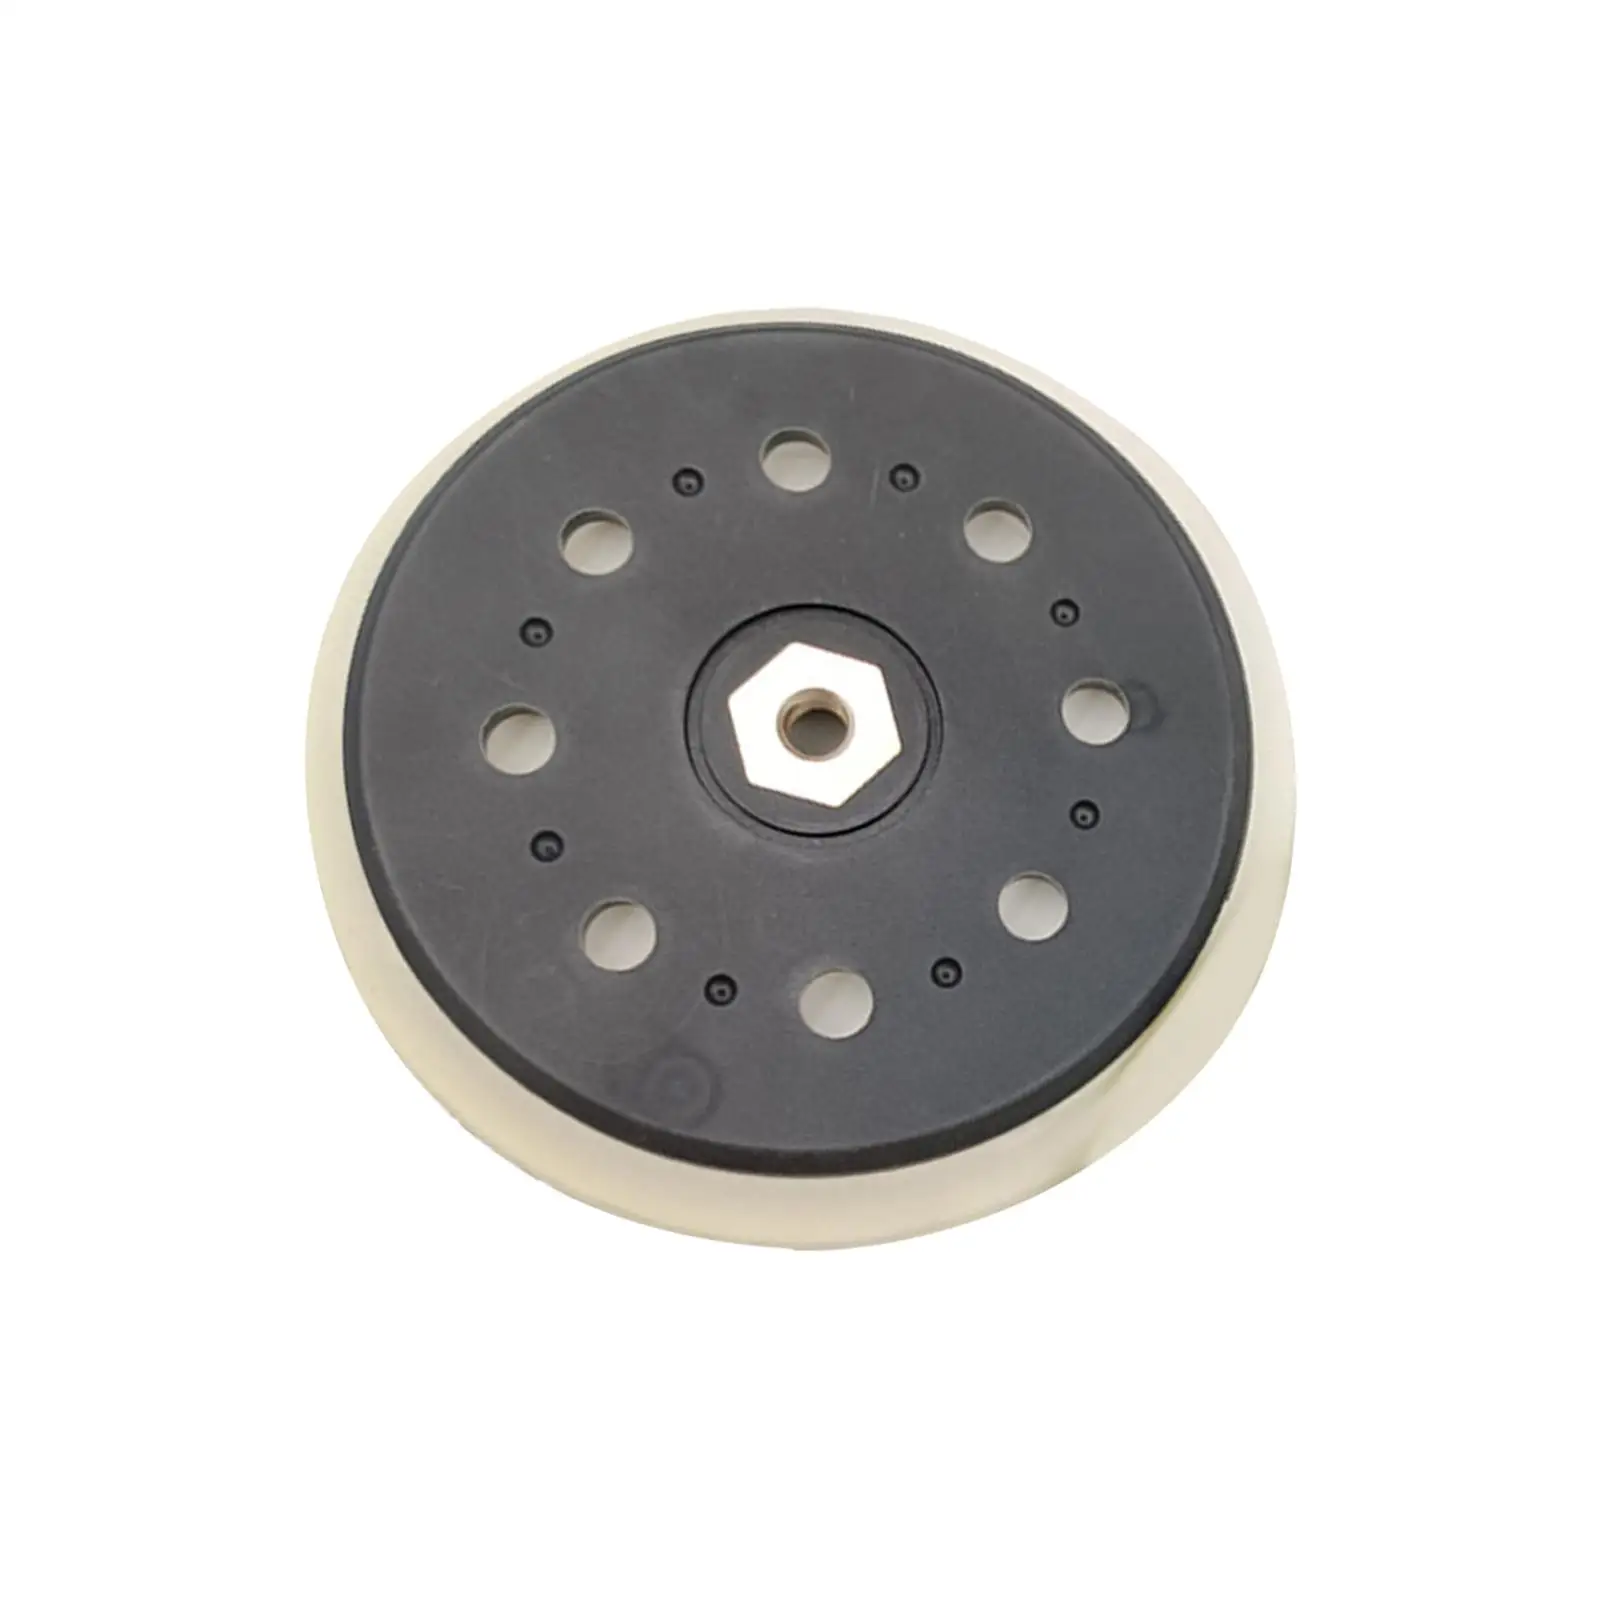 15 Holes Sanding Disc Pad 6 inch Backup Pad for Orbit Sander Backing Grinding Polishing Pad Disc with Mount Hole for Polisher